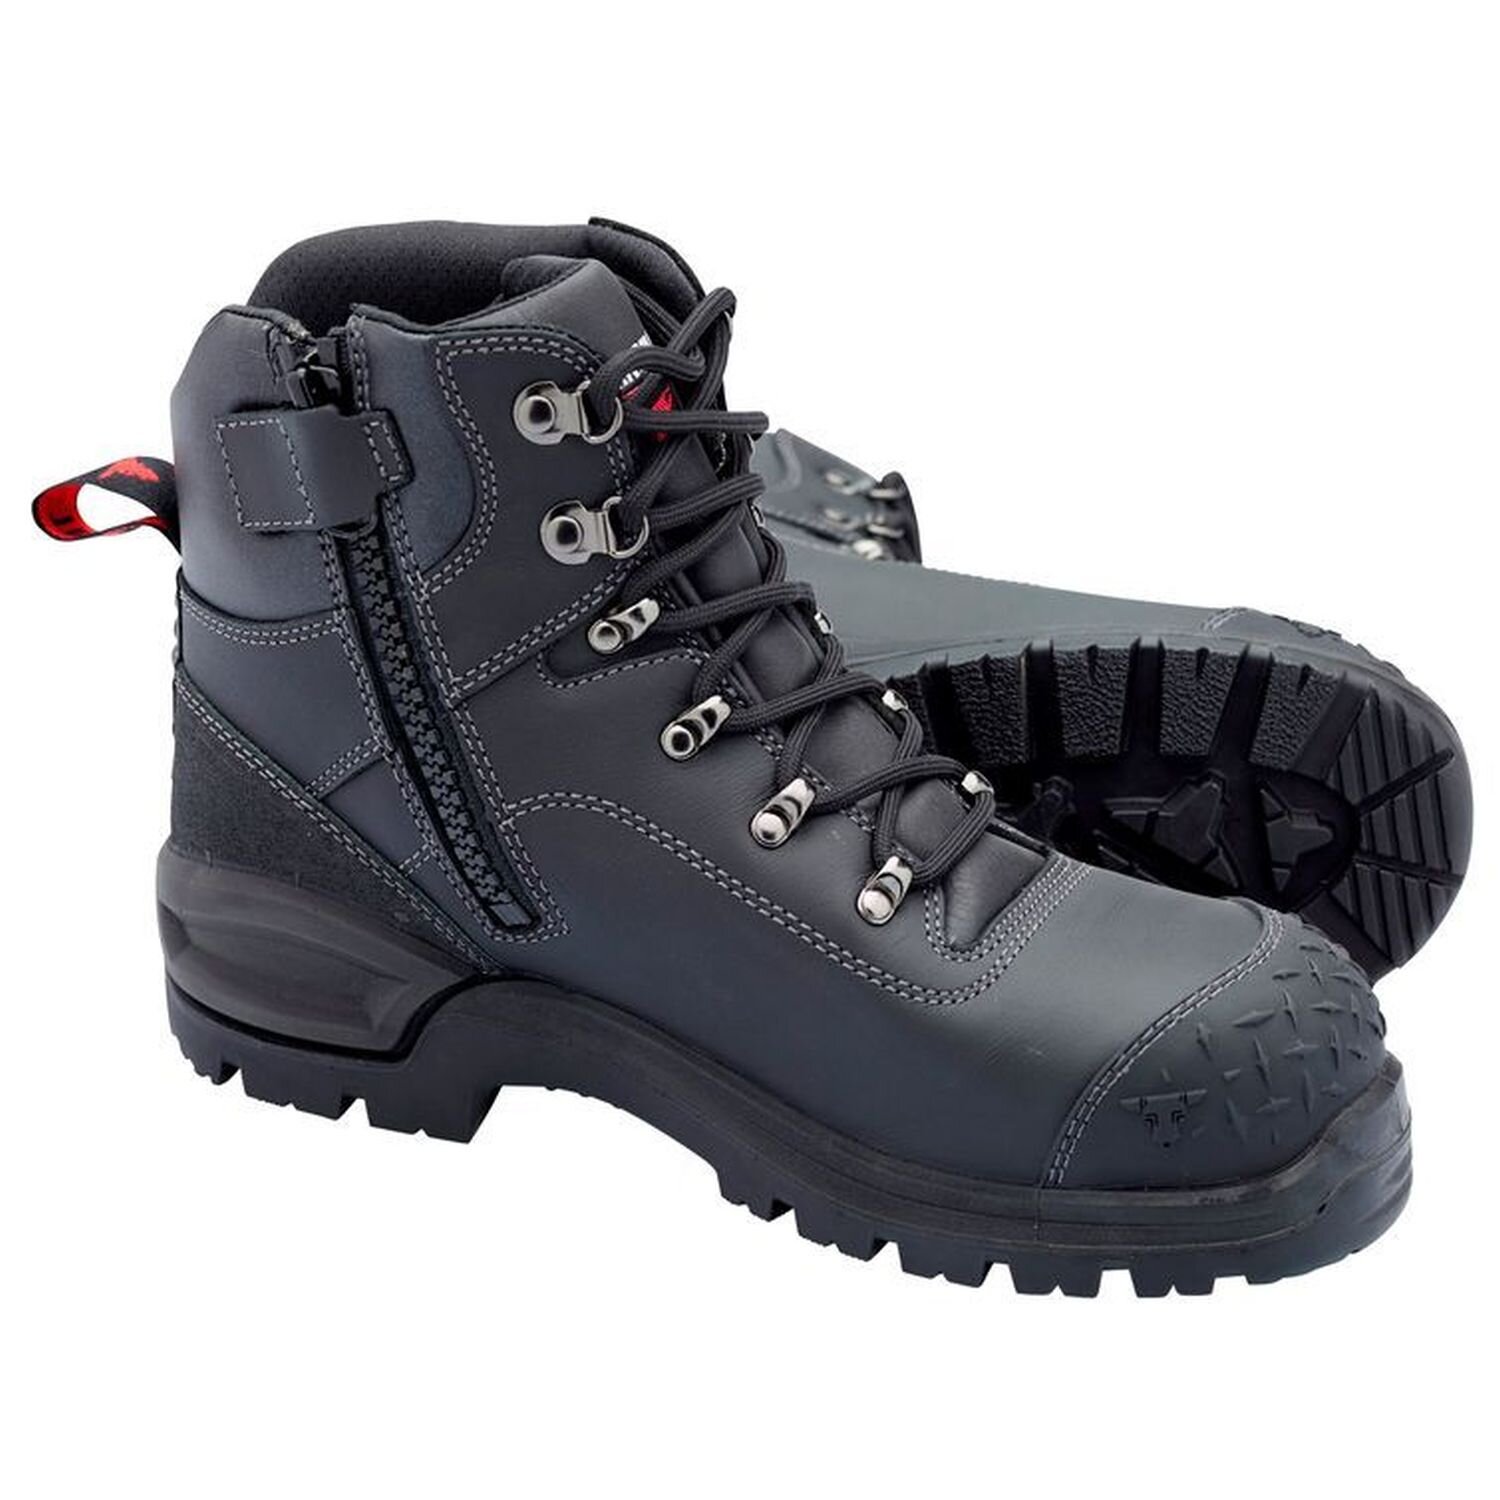 John Bull Crow 2.0 Cushion Core Lace Up/Zip Safety Boot With Toe Guard